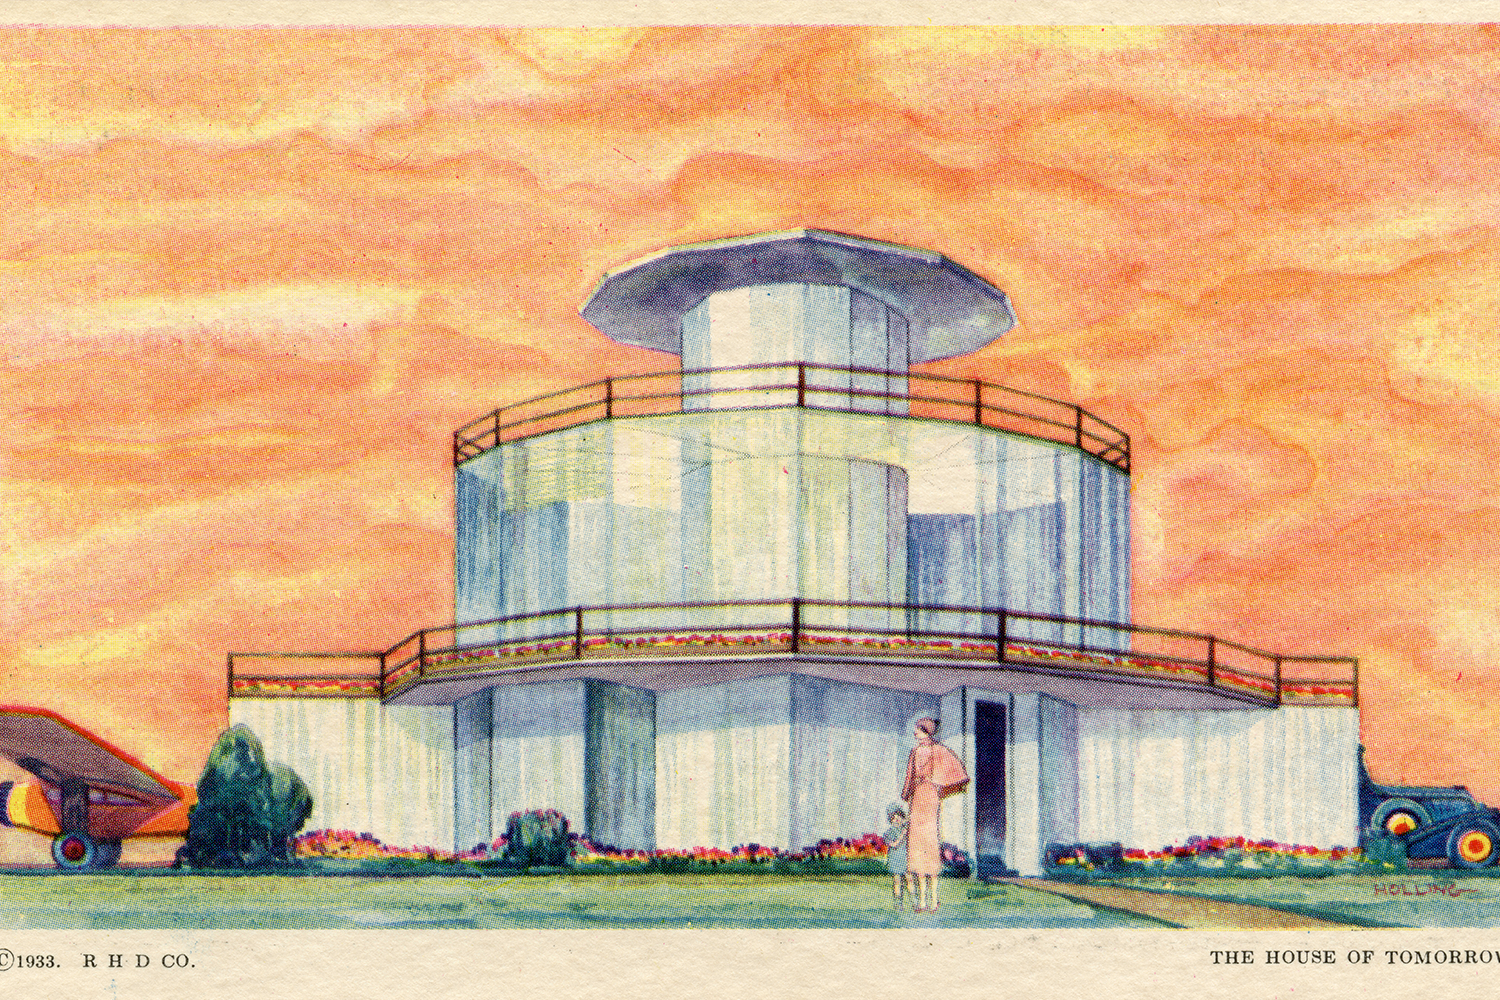 Postcard rendering of the House of Tomorrow